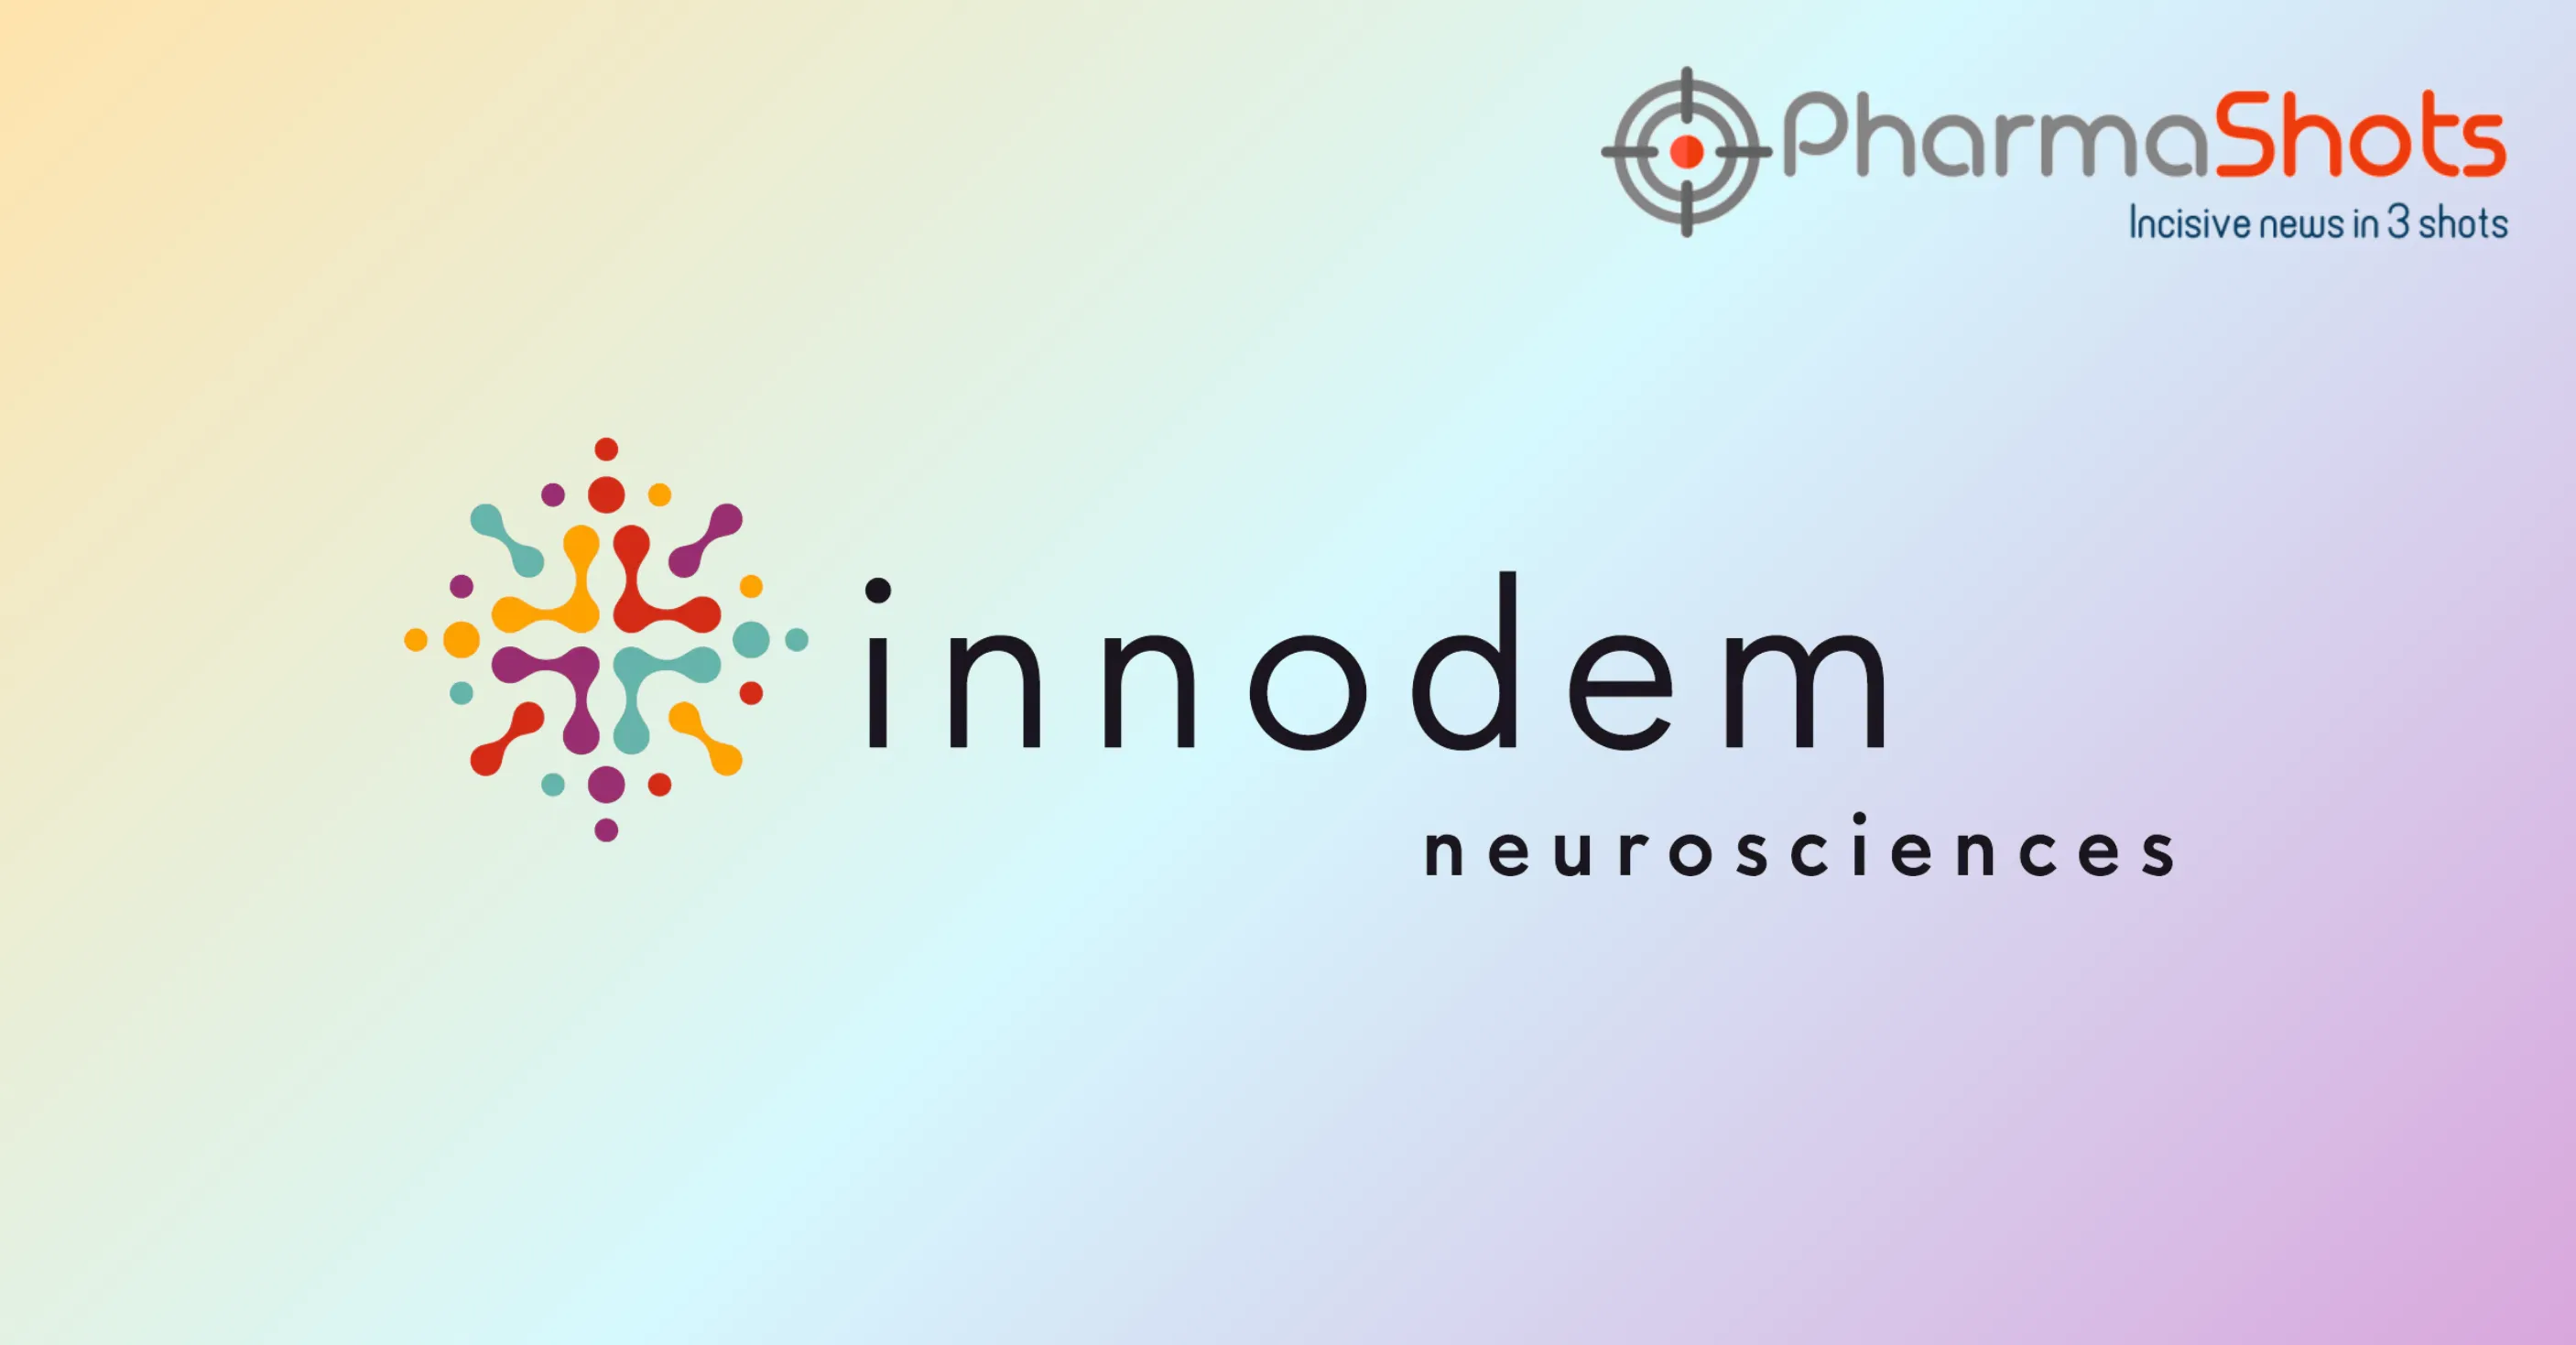 Innodem Neuroscience’s ETNA-MS Receives Health Canada’s Approval for the Treatment of Multiple Sclerosis (MS)